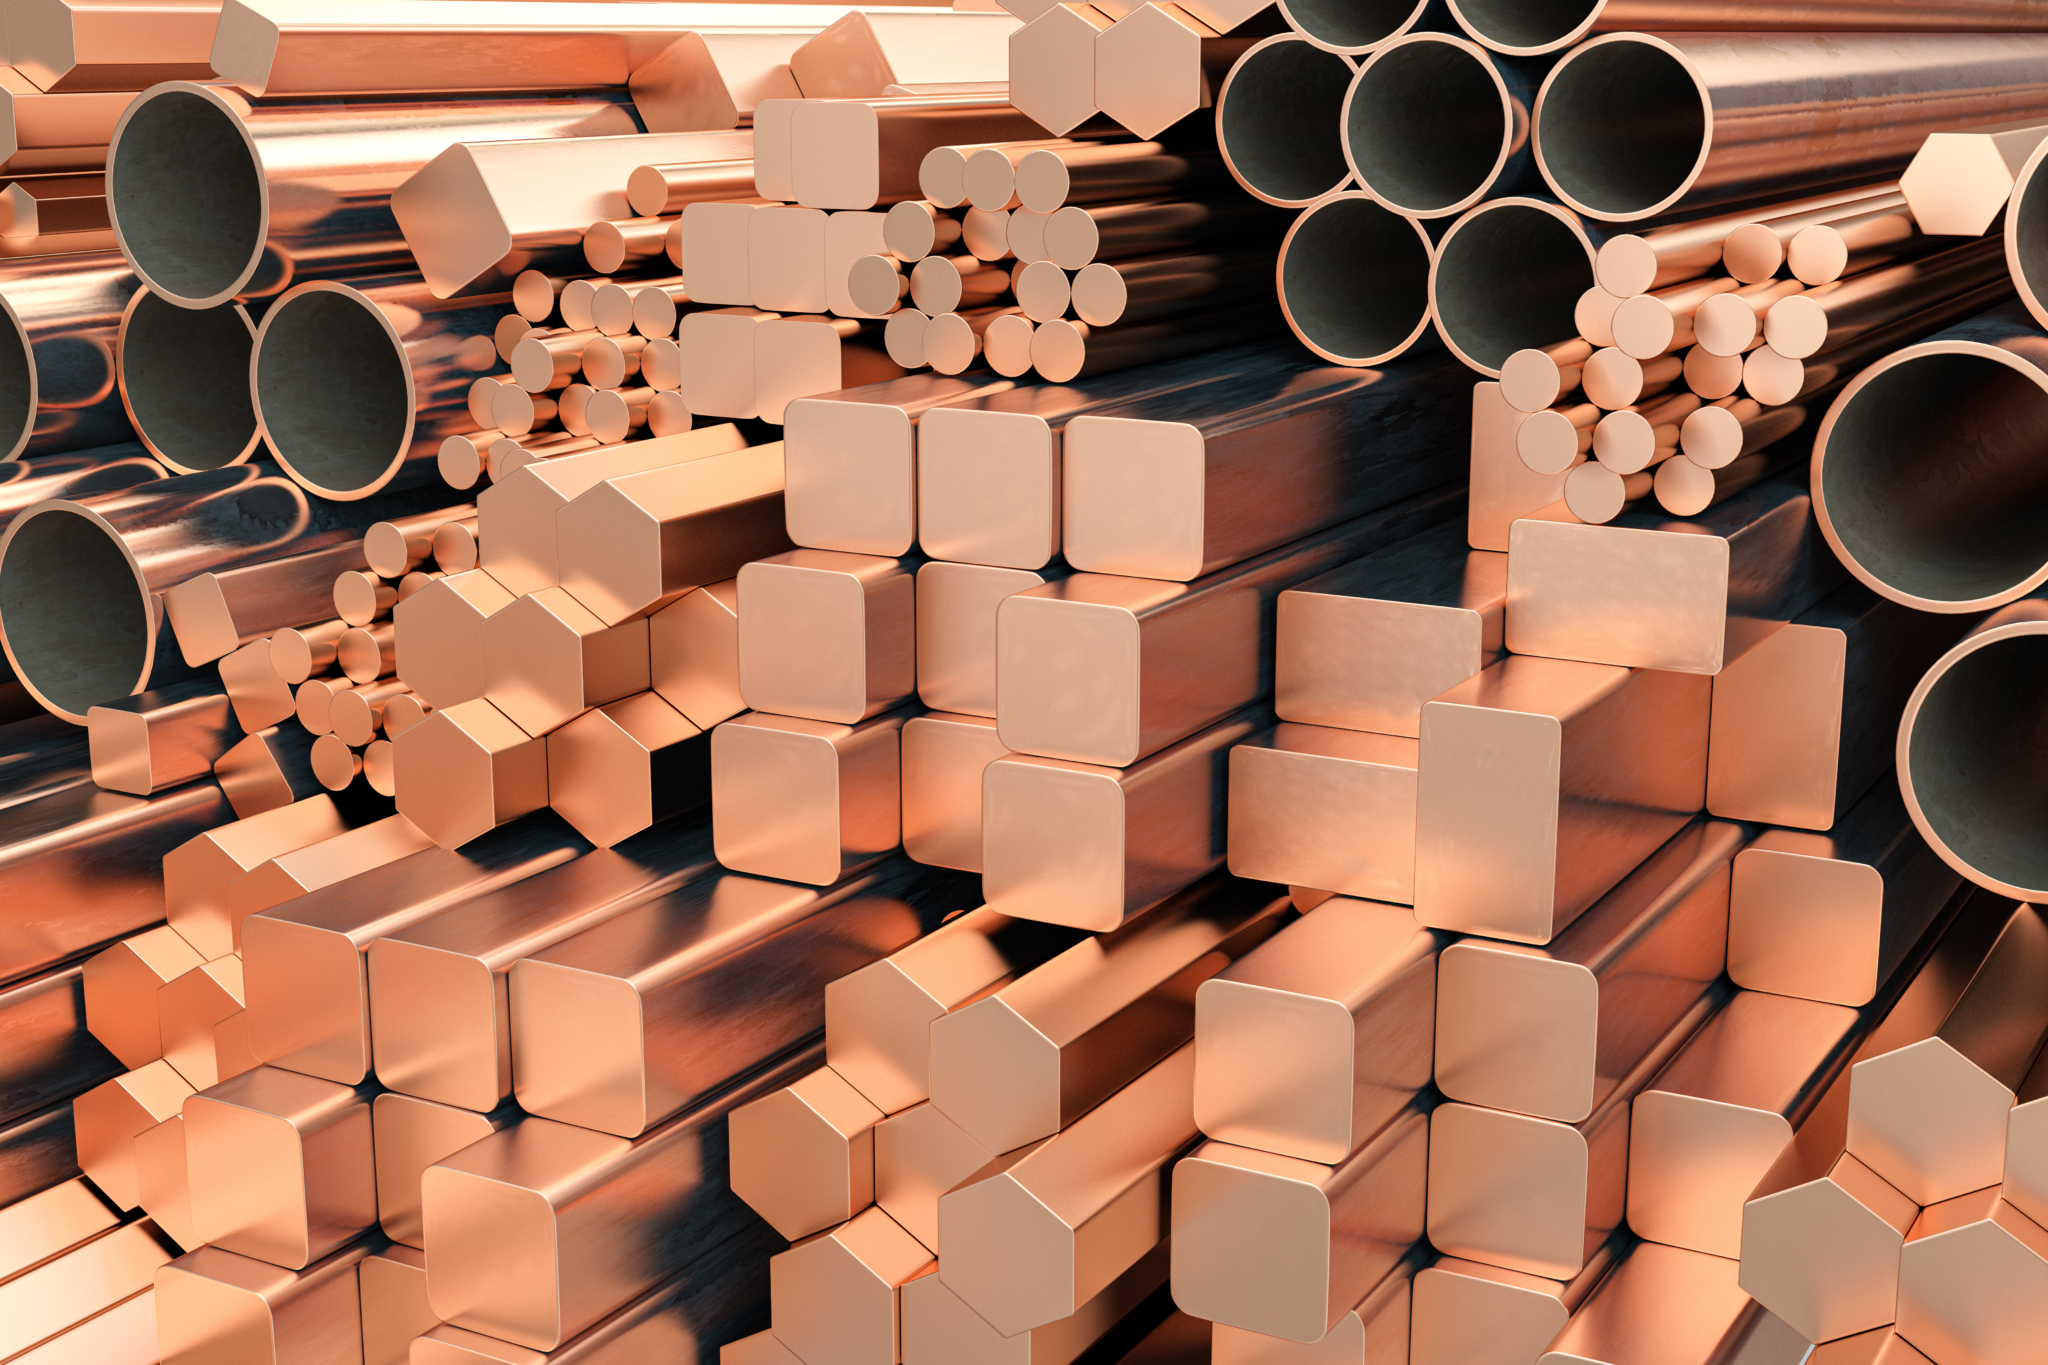 Copper pipes stacked on top of each other